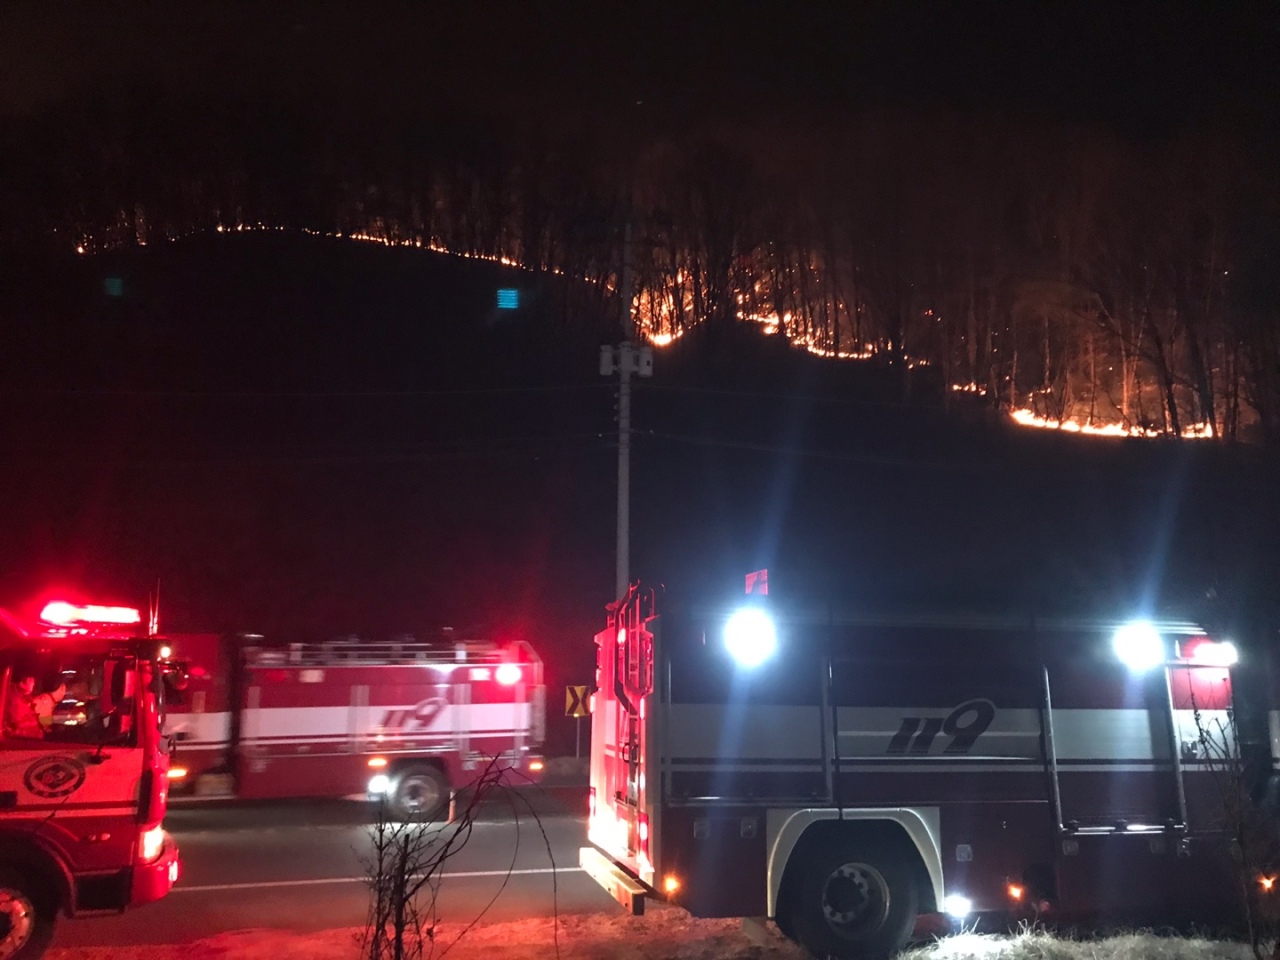 Firefighters work to contain a wildfire in Andong, North Gyeongsang Province, on Sunday, in this photo provided by the National Fire Agency. (National Fire Agency)